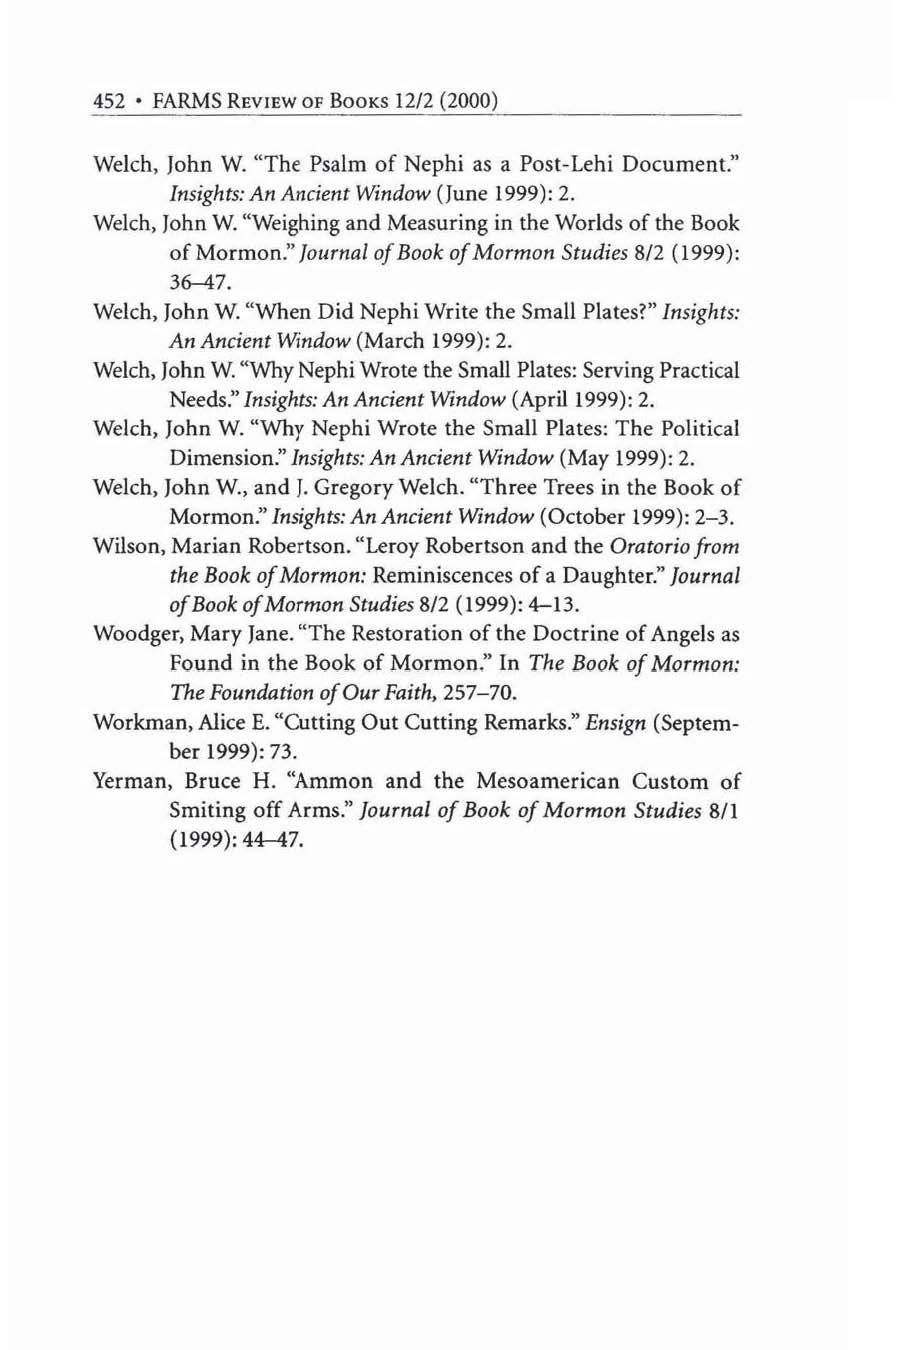 452 FARMS REVIEW OF BOOKS 12/2 (2000) Welch, John W. "The Psalm of Nephi as a Post-Lehi Document." Insights: An Ancient Window (June 1999): 2. Welch, John W. "Weighing and Measuring in the Worlds of the Book of Mormon.